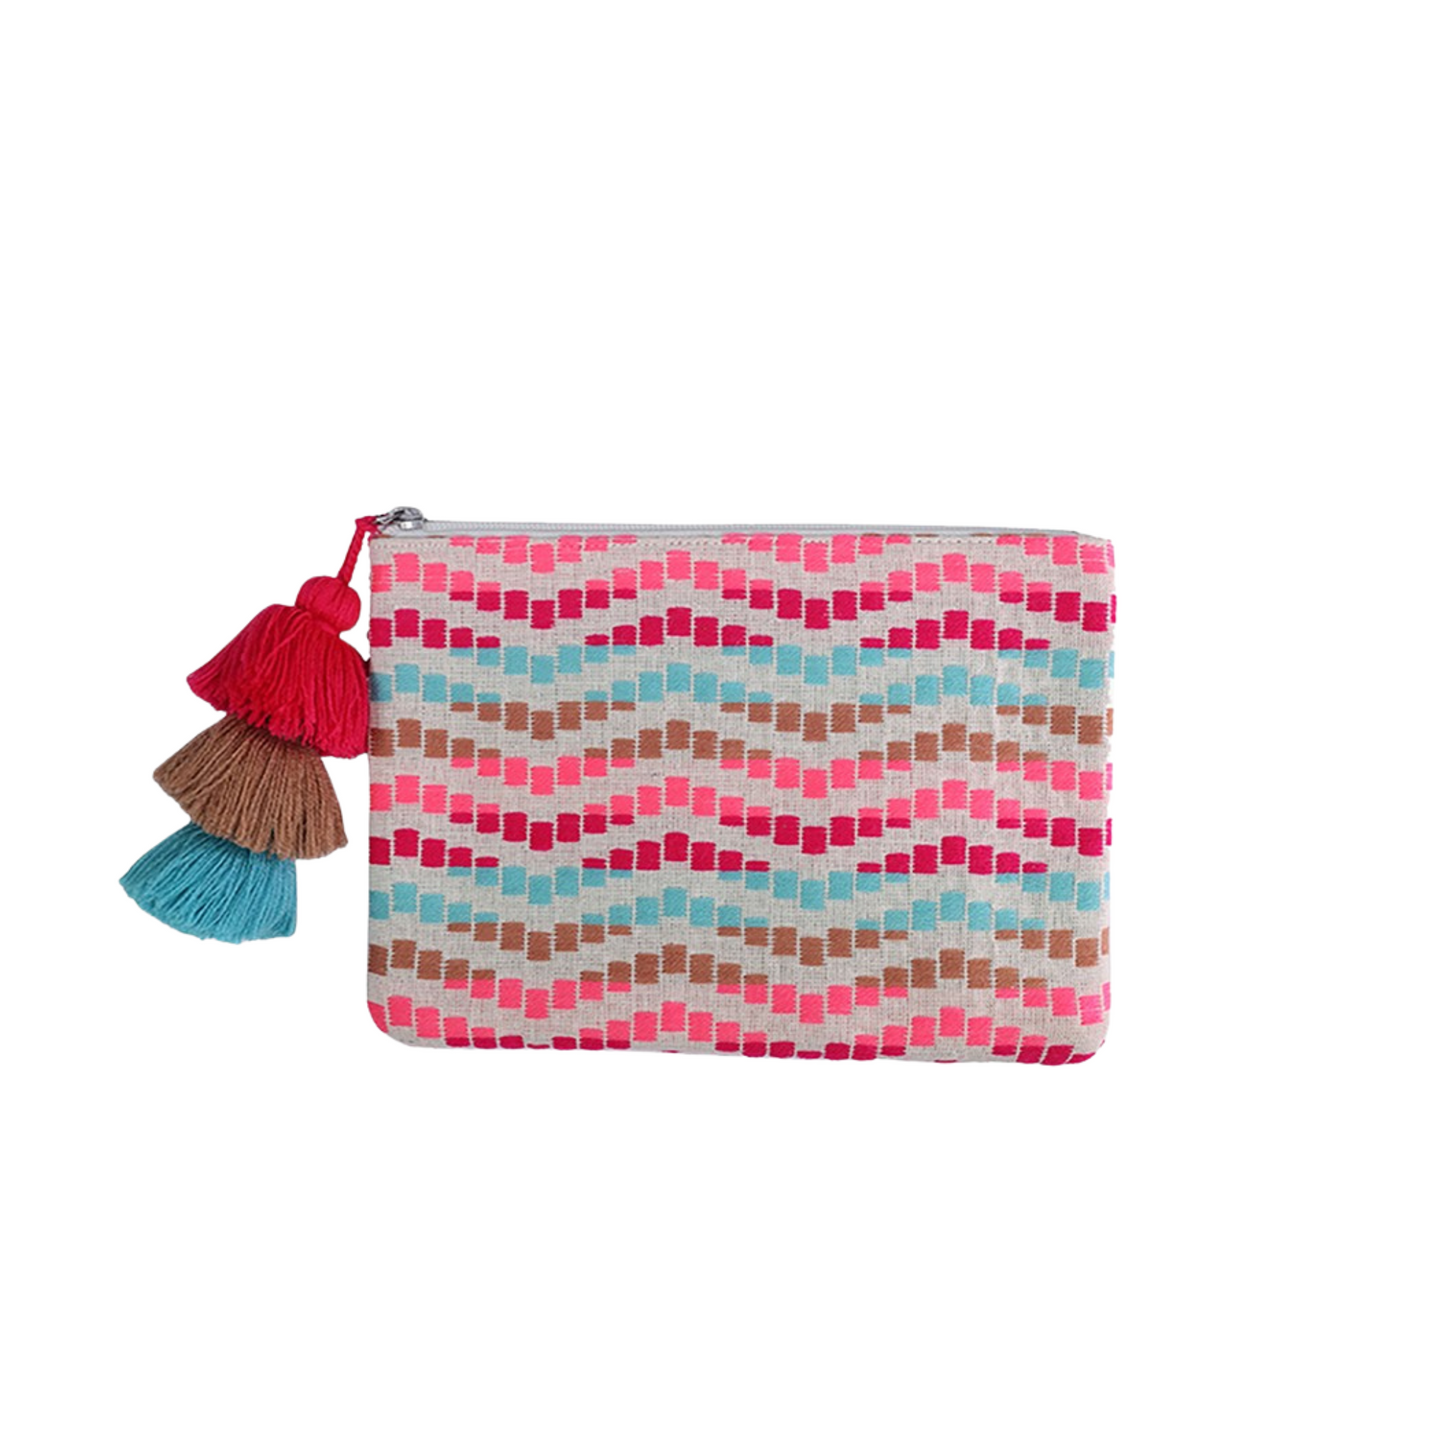 Faith Cotton pouch in turquoise/pink